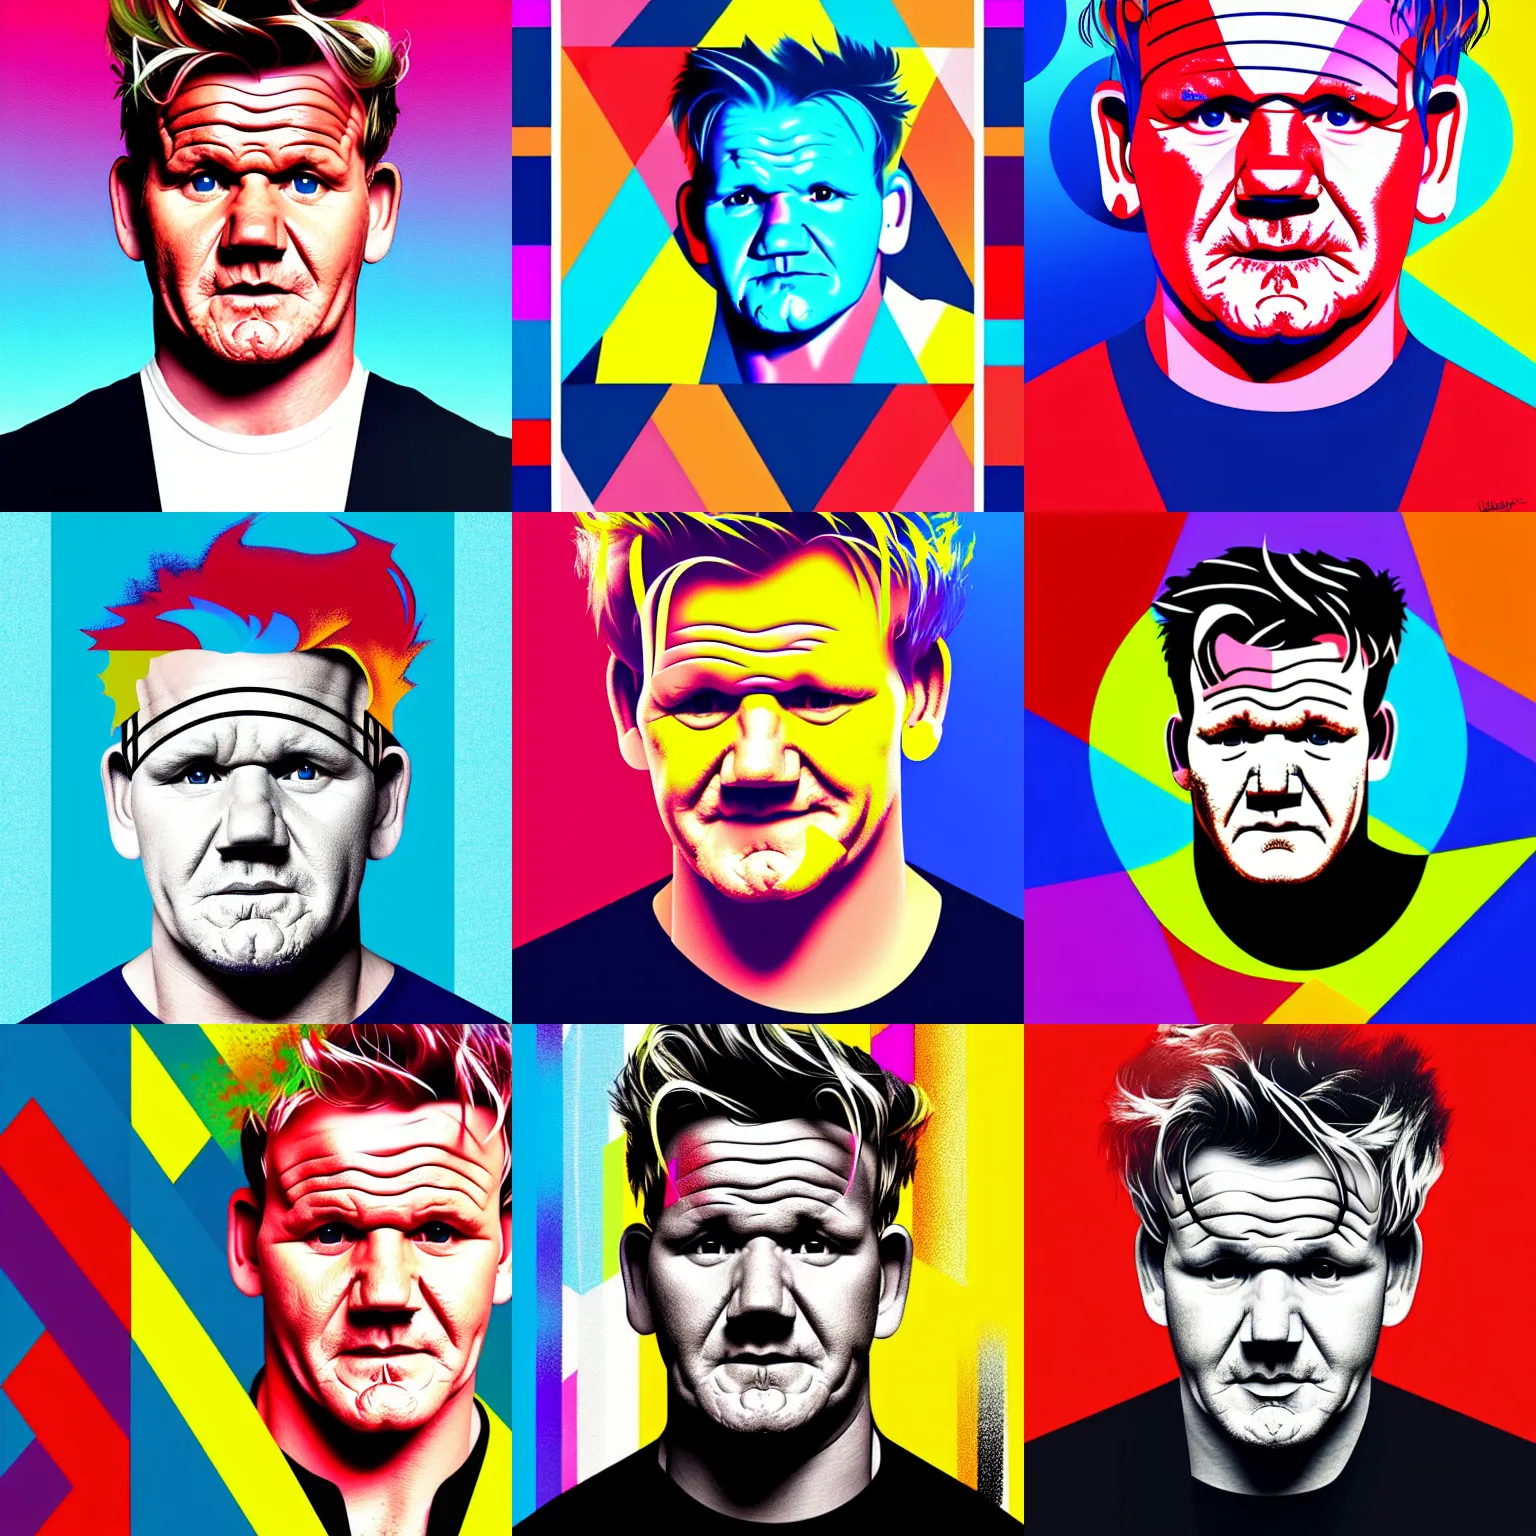 Prompt: A portrait of Gordon Ramsay, geometric shapes, digital art, rounded corners, candy colors, spray paint, bold graphics